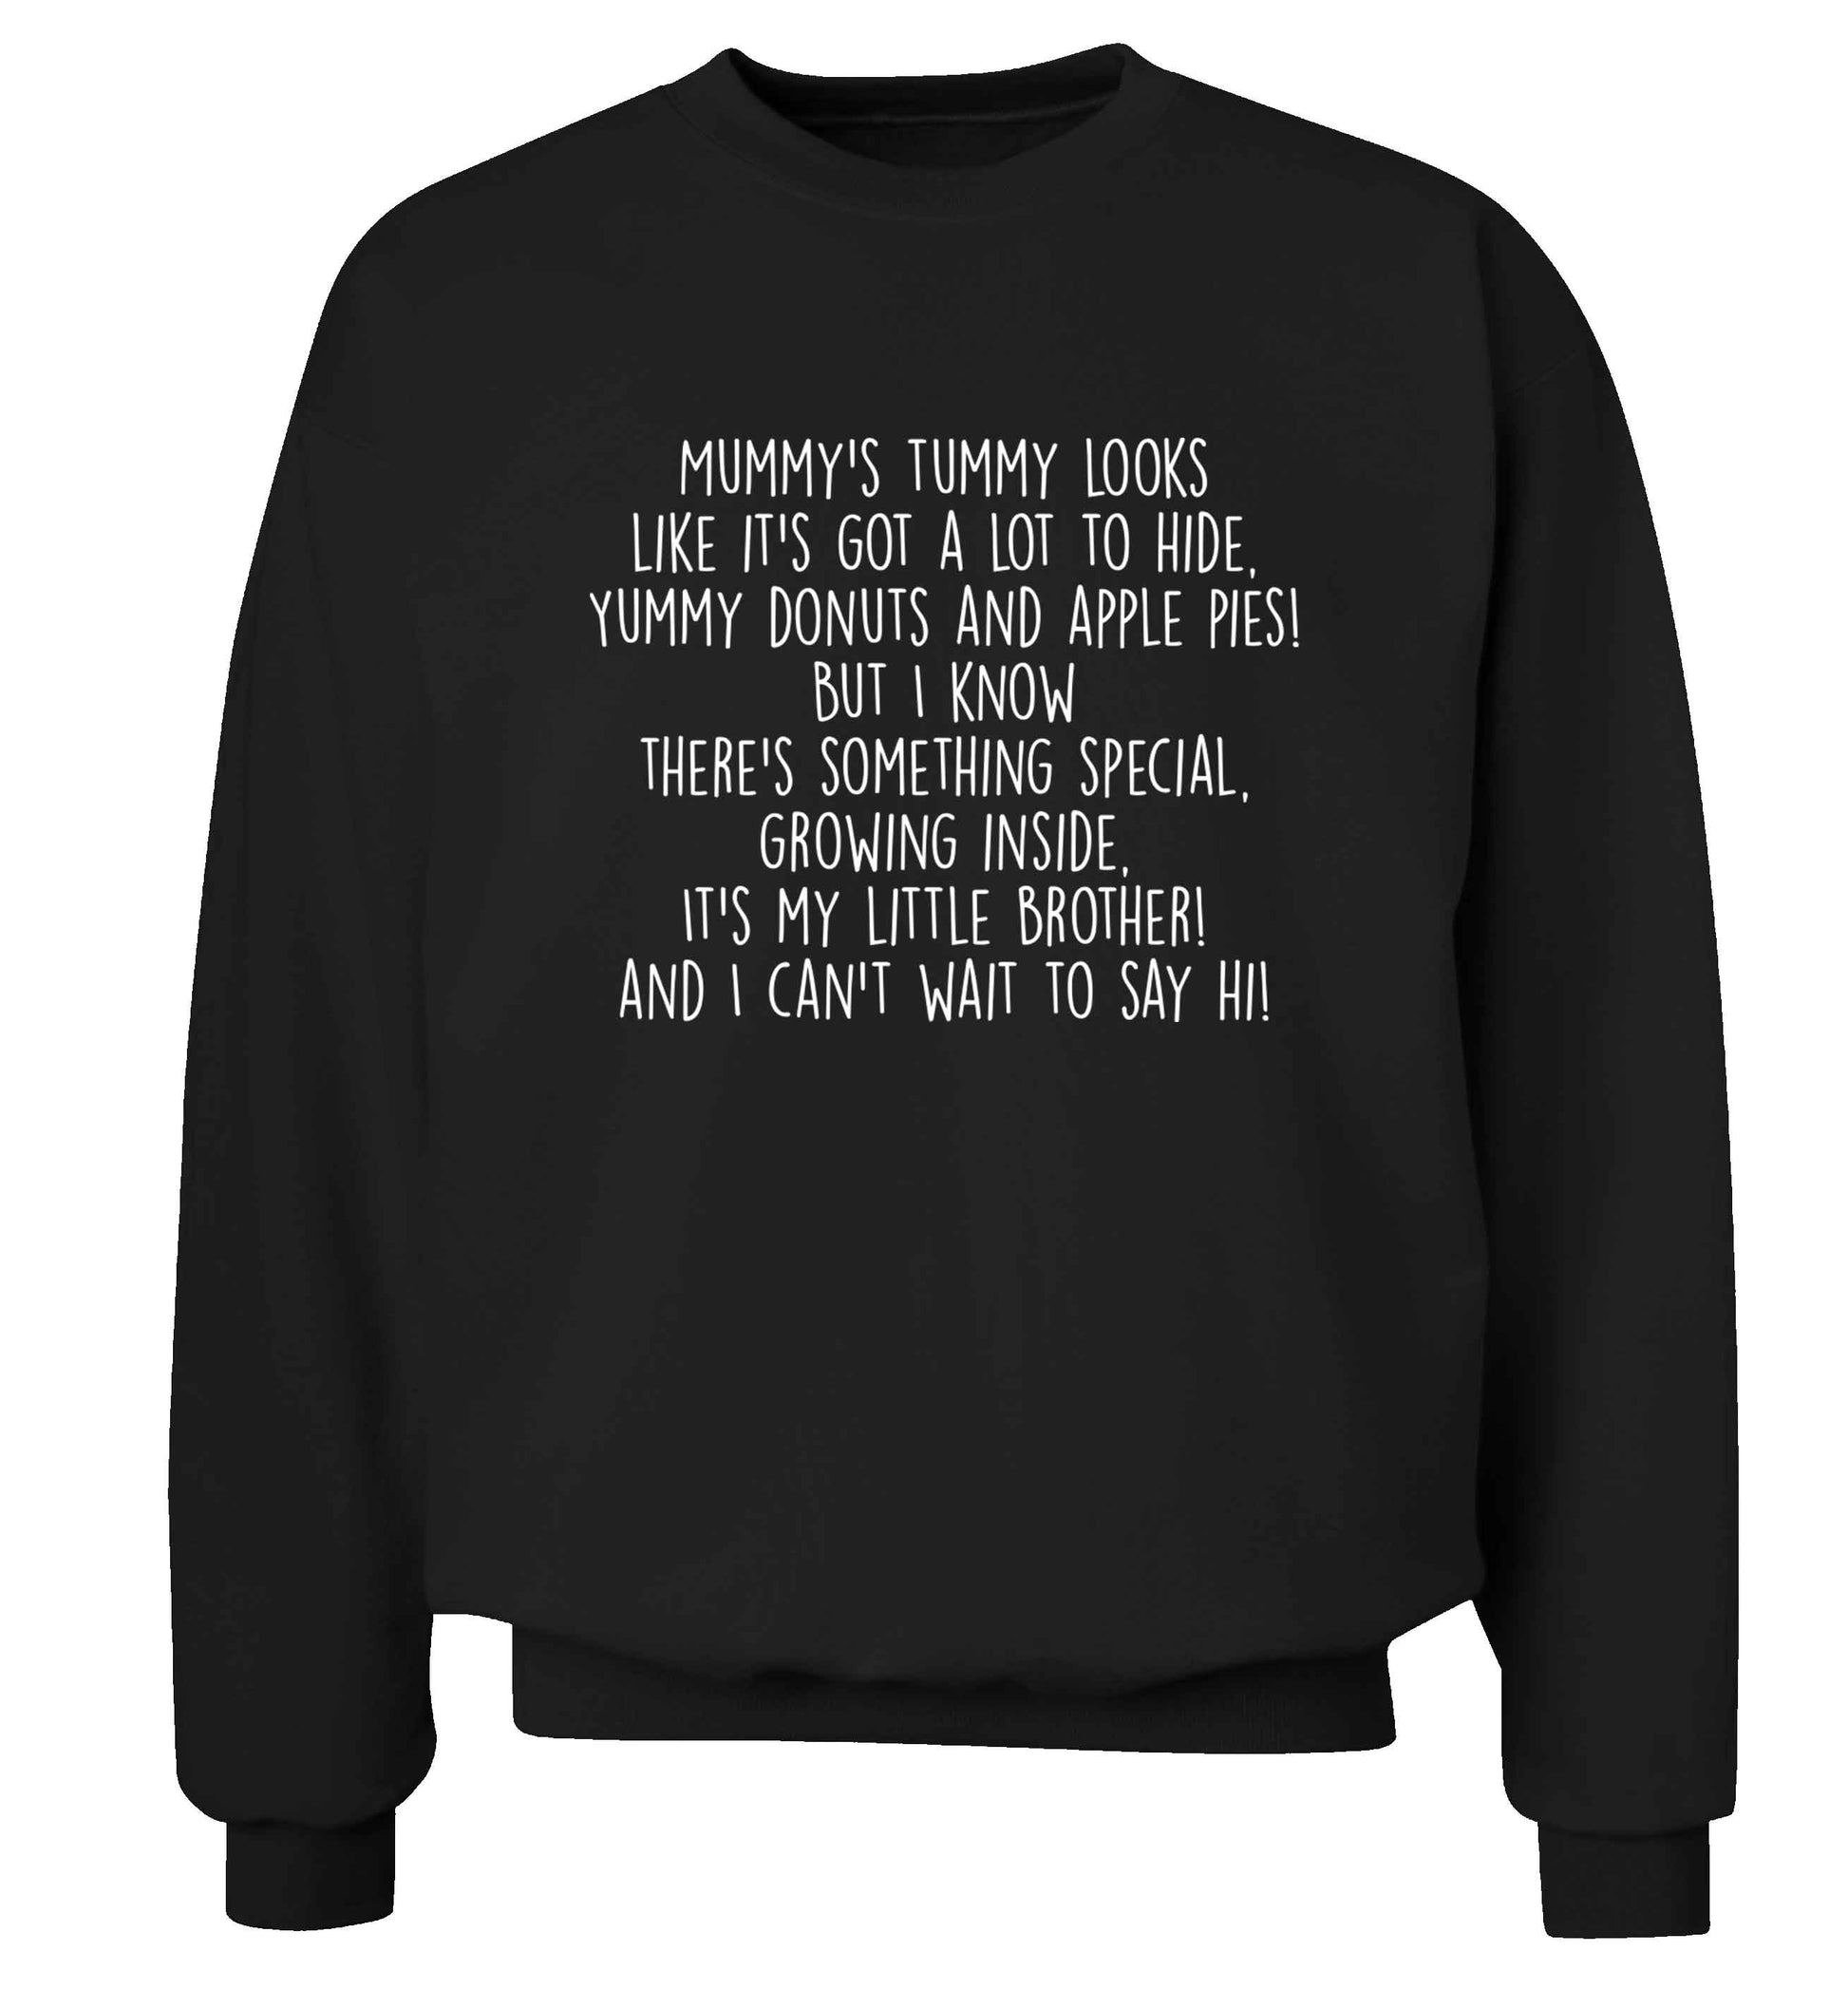 Something special growing inside it's my little brother I can't wait to say hi! Adult's unisex black Sweater 2XL